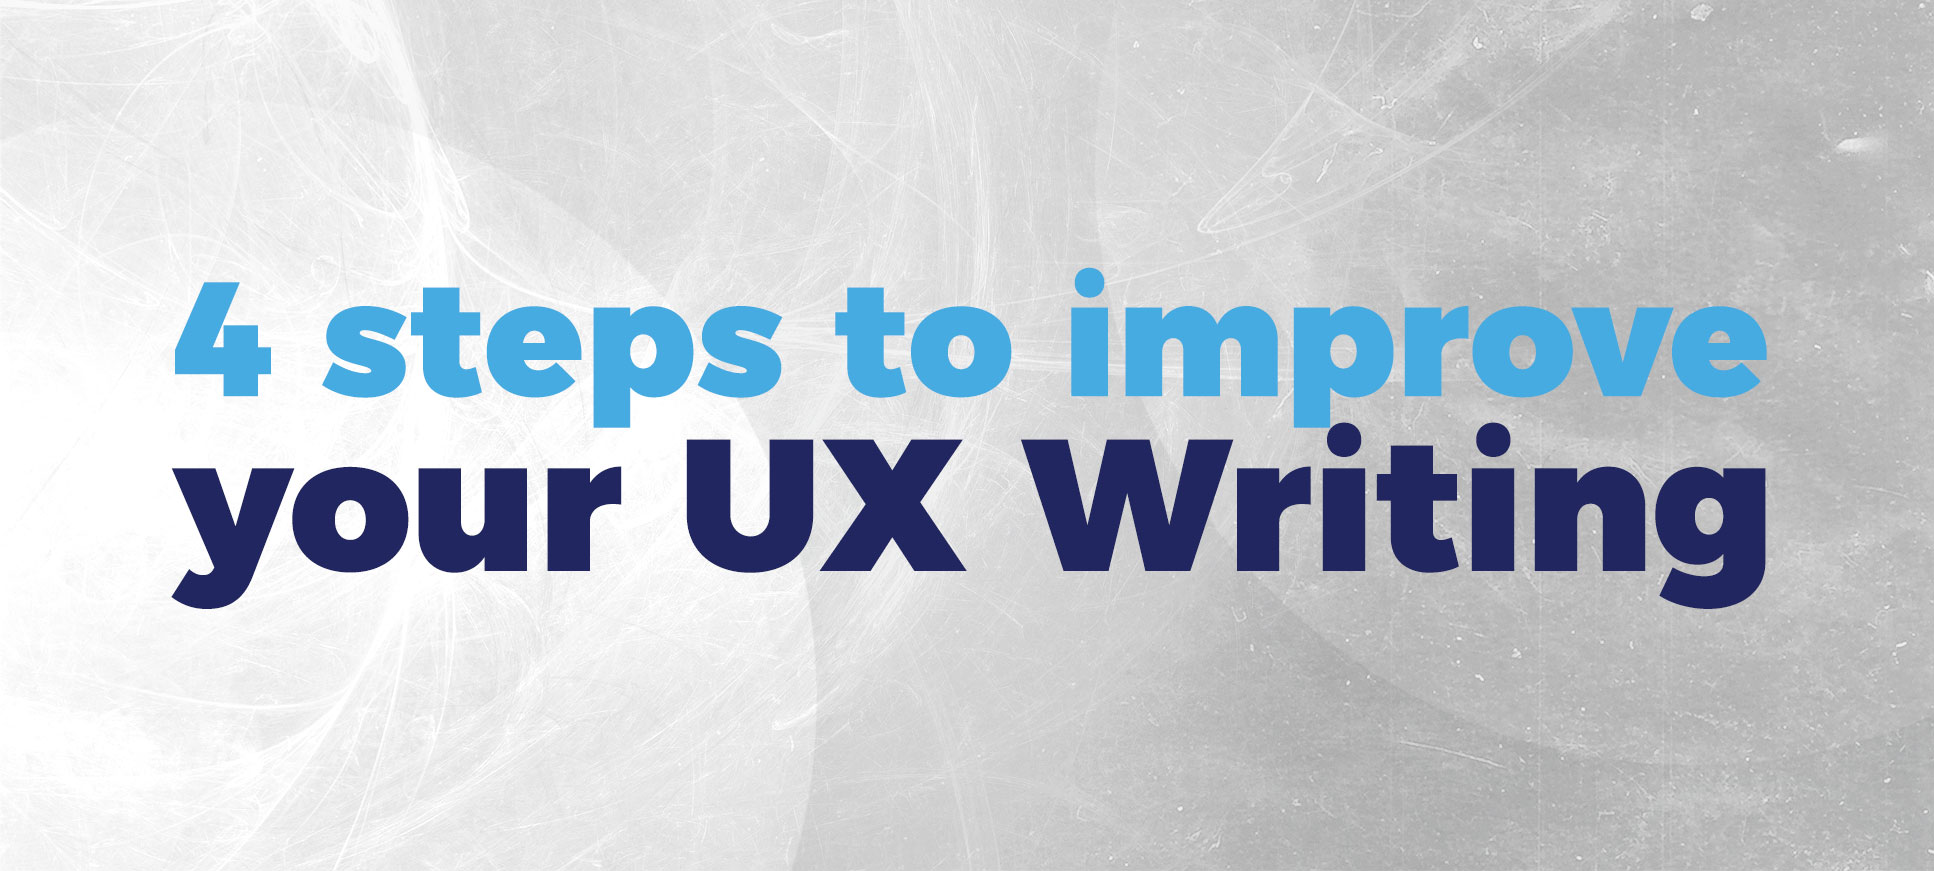 4 steps to improve your UX Writing